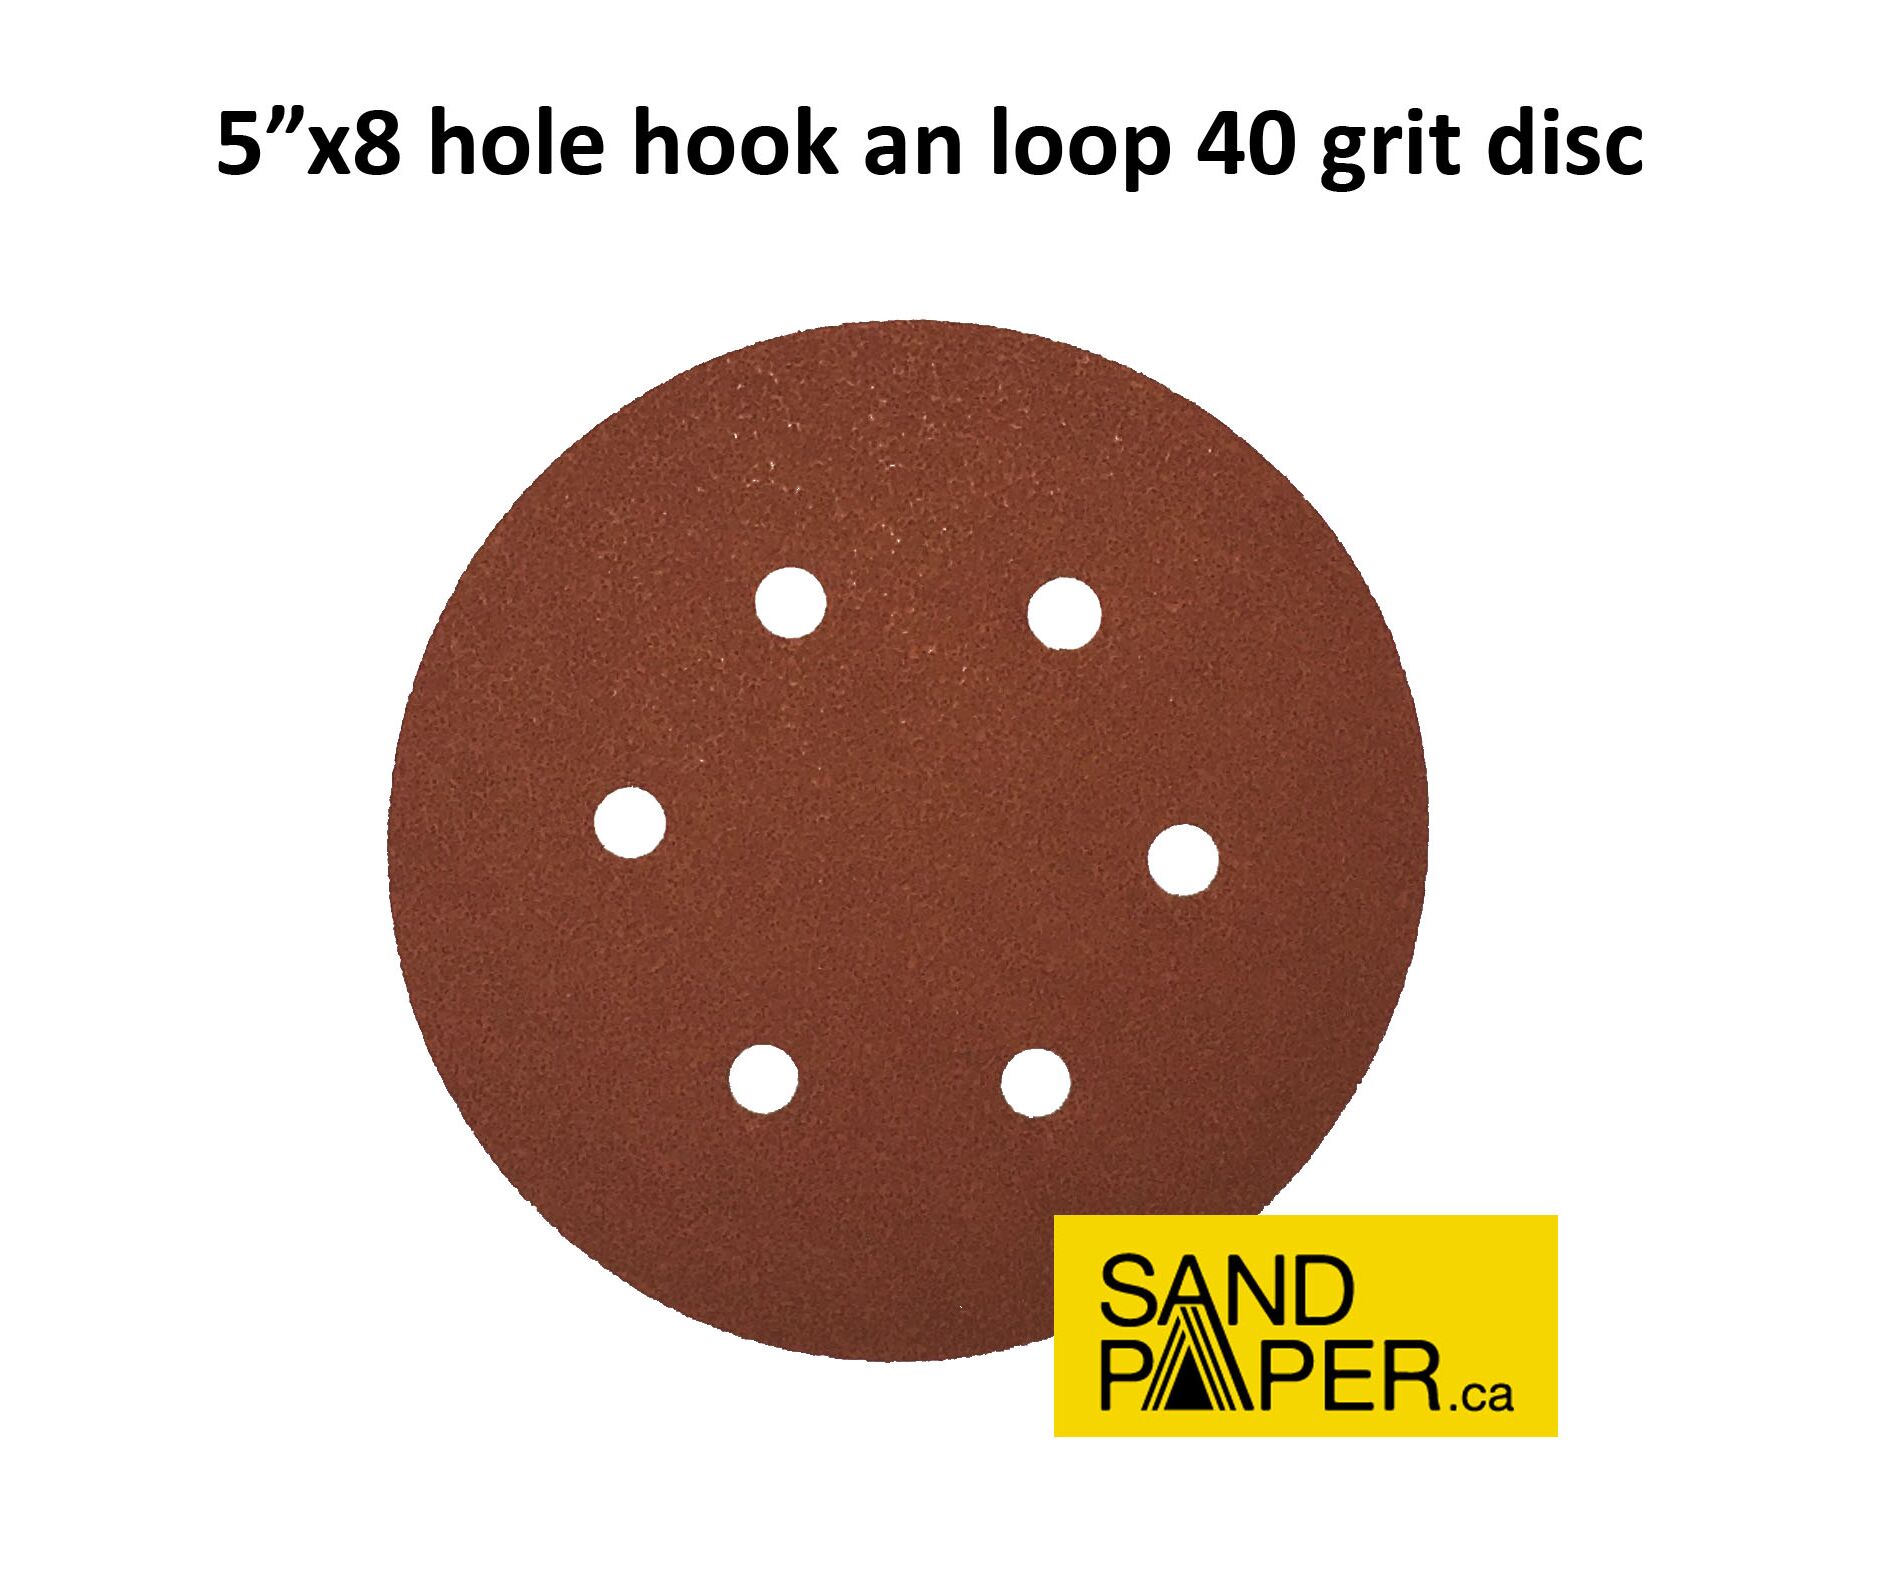 VFINE 50 Pieces 5-Inch 8-Hole Sanding Discs Assorted 60/80/120/150/220 Grits Gold Sandpaper Hook and Loop for Random Orbital Round Sandpaper for Automotive Woodworking 